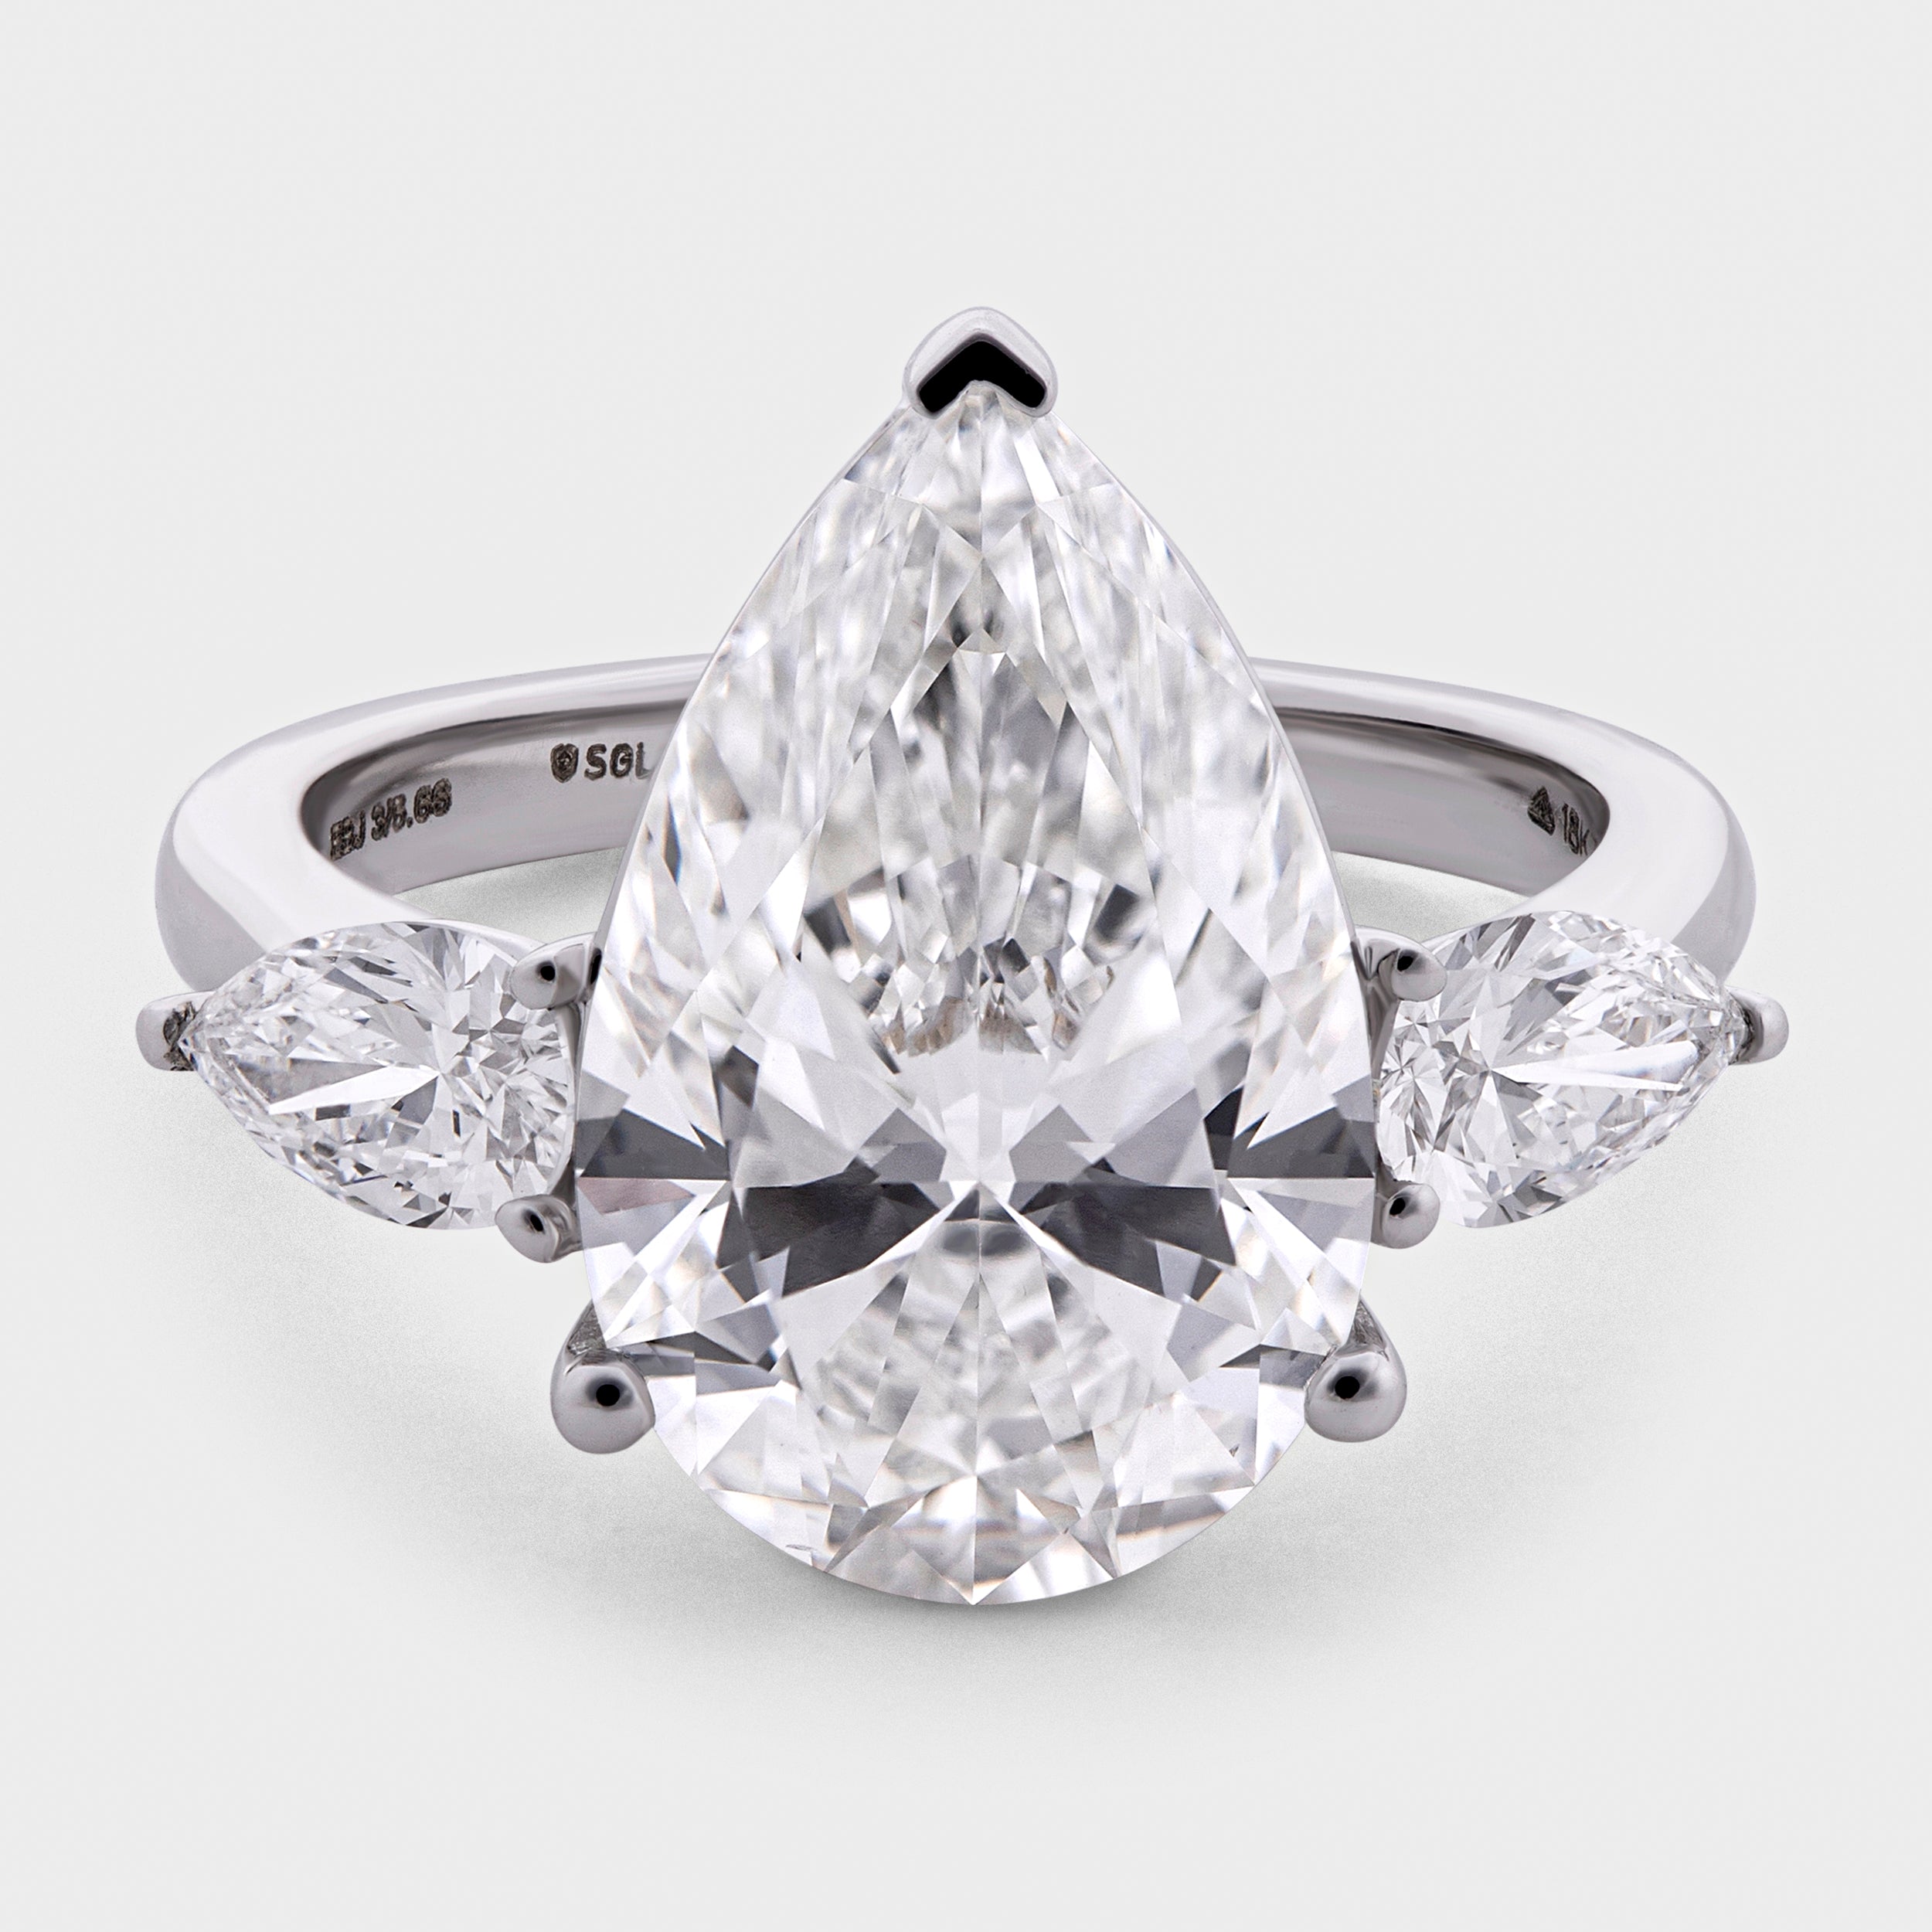 White Gold Ring with Pear Cut 5.66 Carat Lab-Grown Solitaire Diamond | SKU : 0020245993